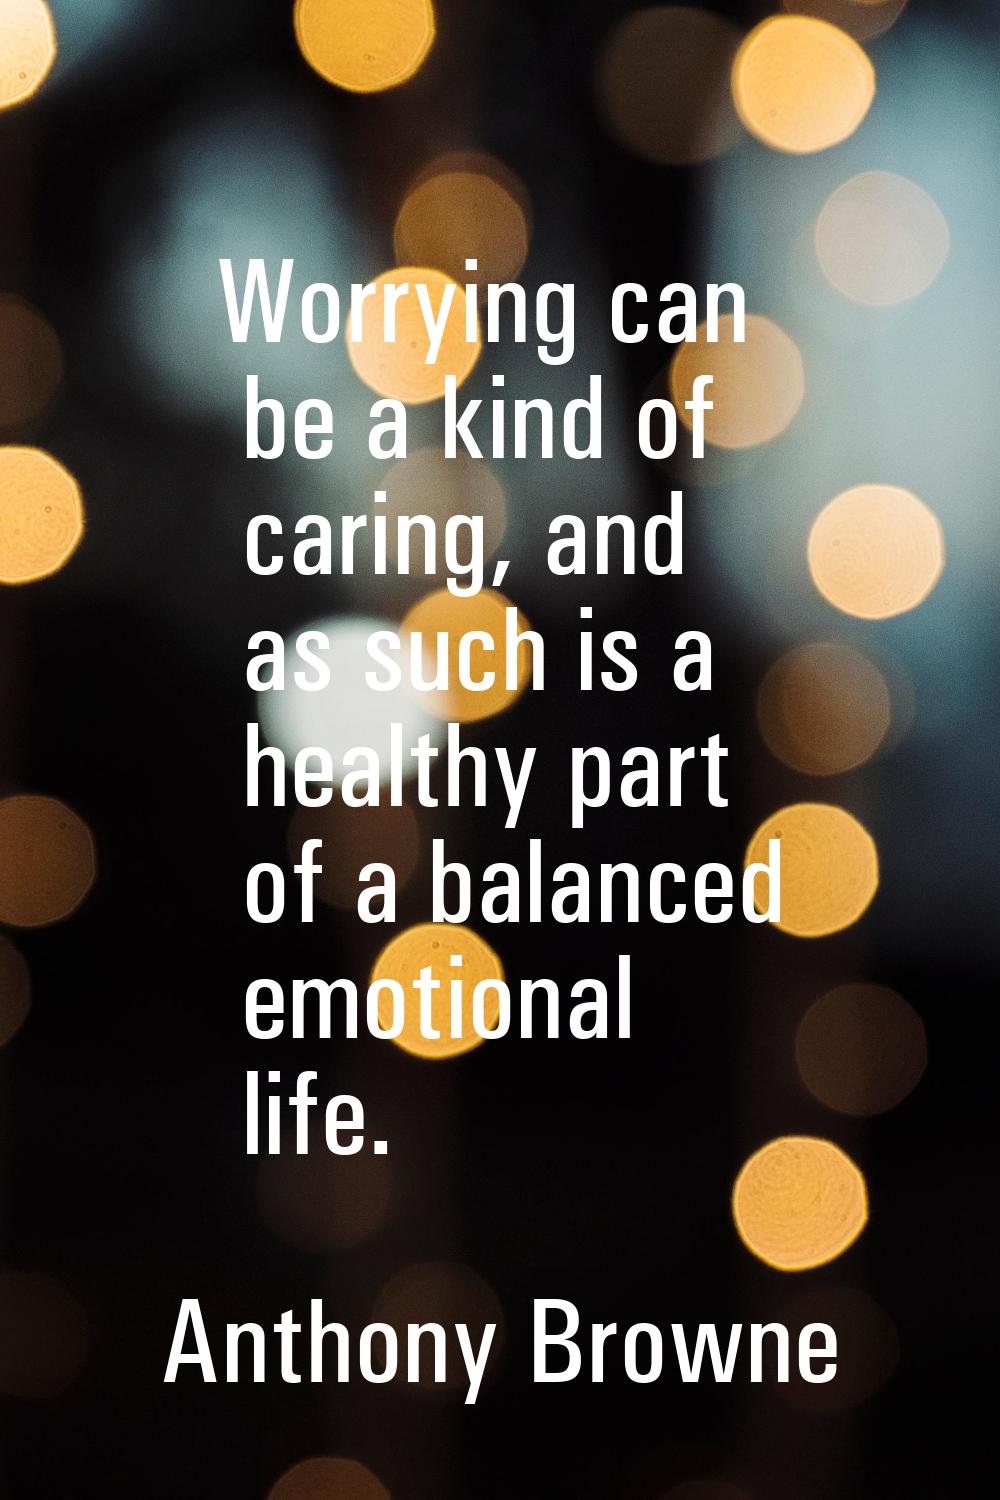 Worrying can be a kind of caring, and as such is a healthy part of a balanced emotional life.